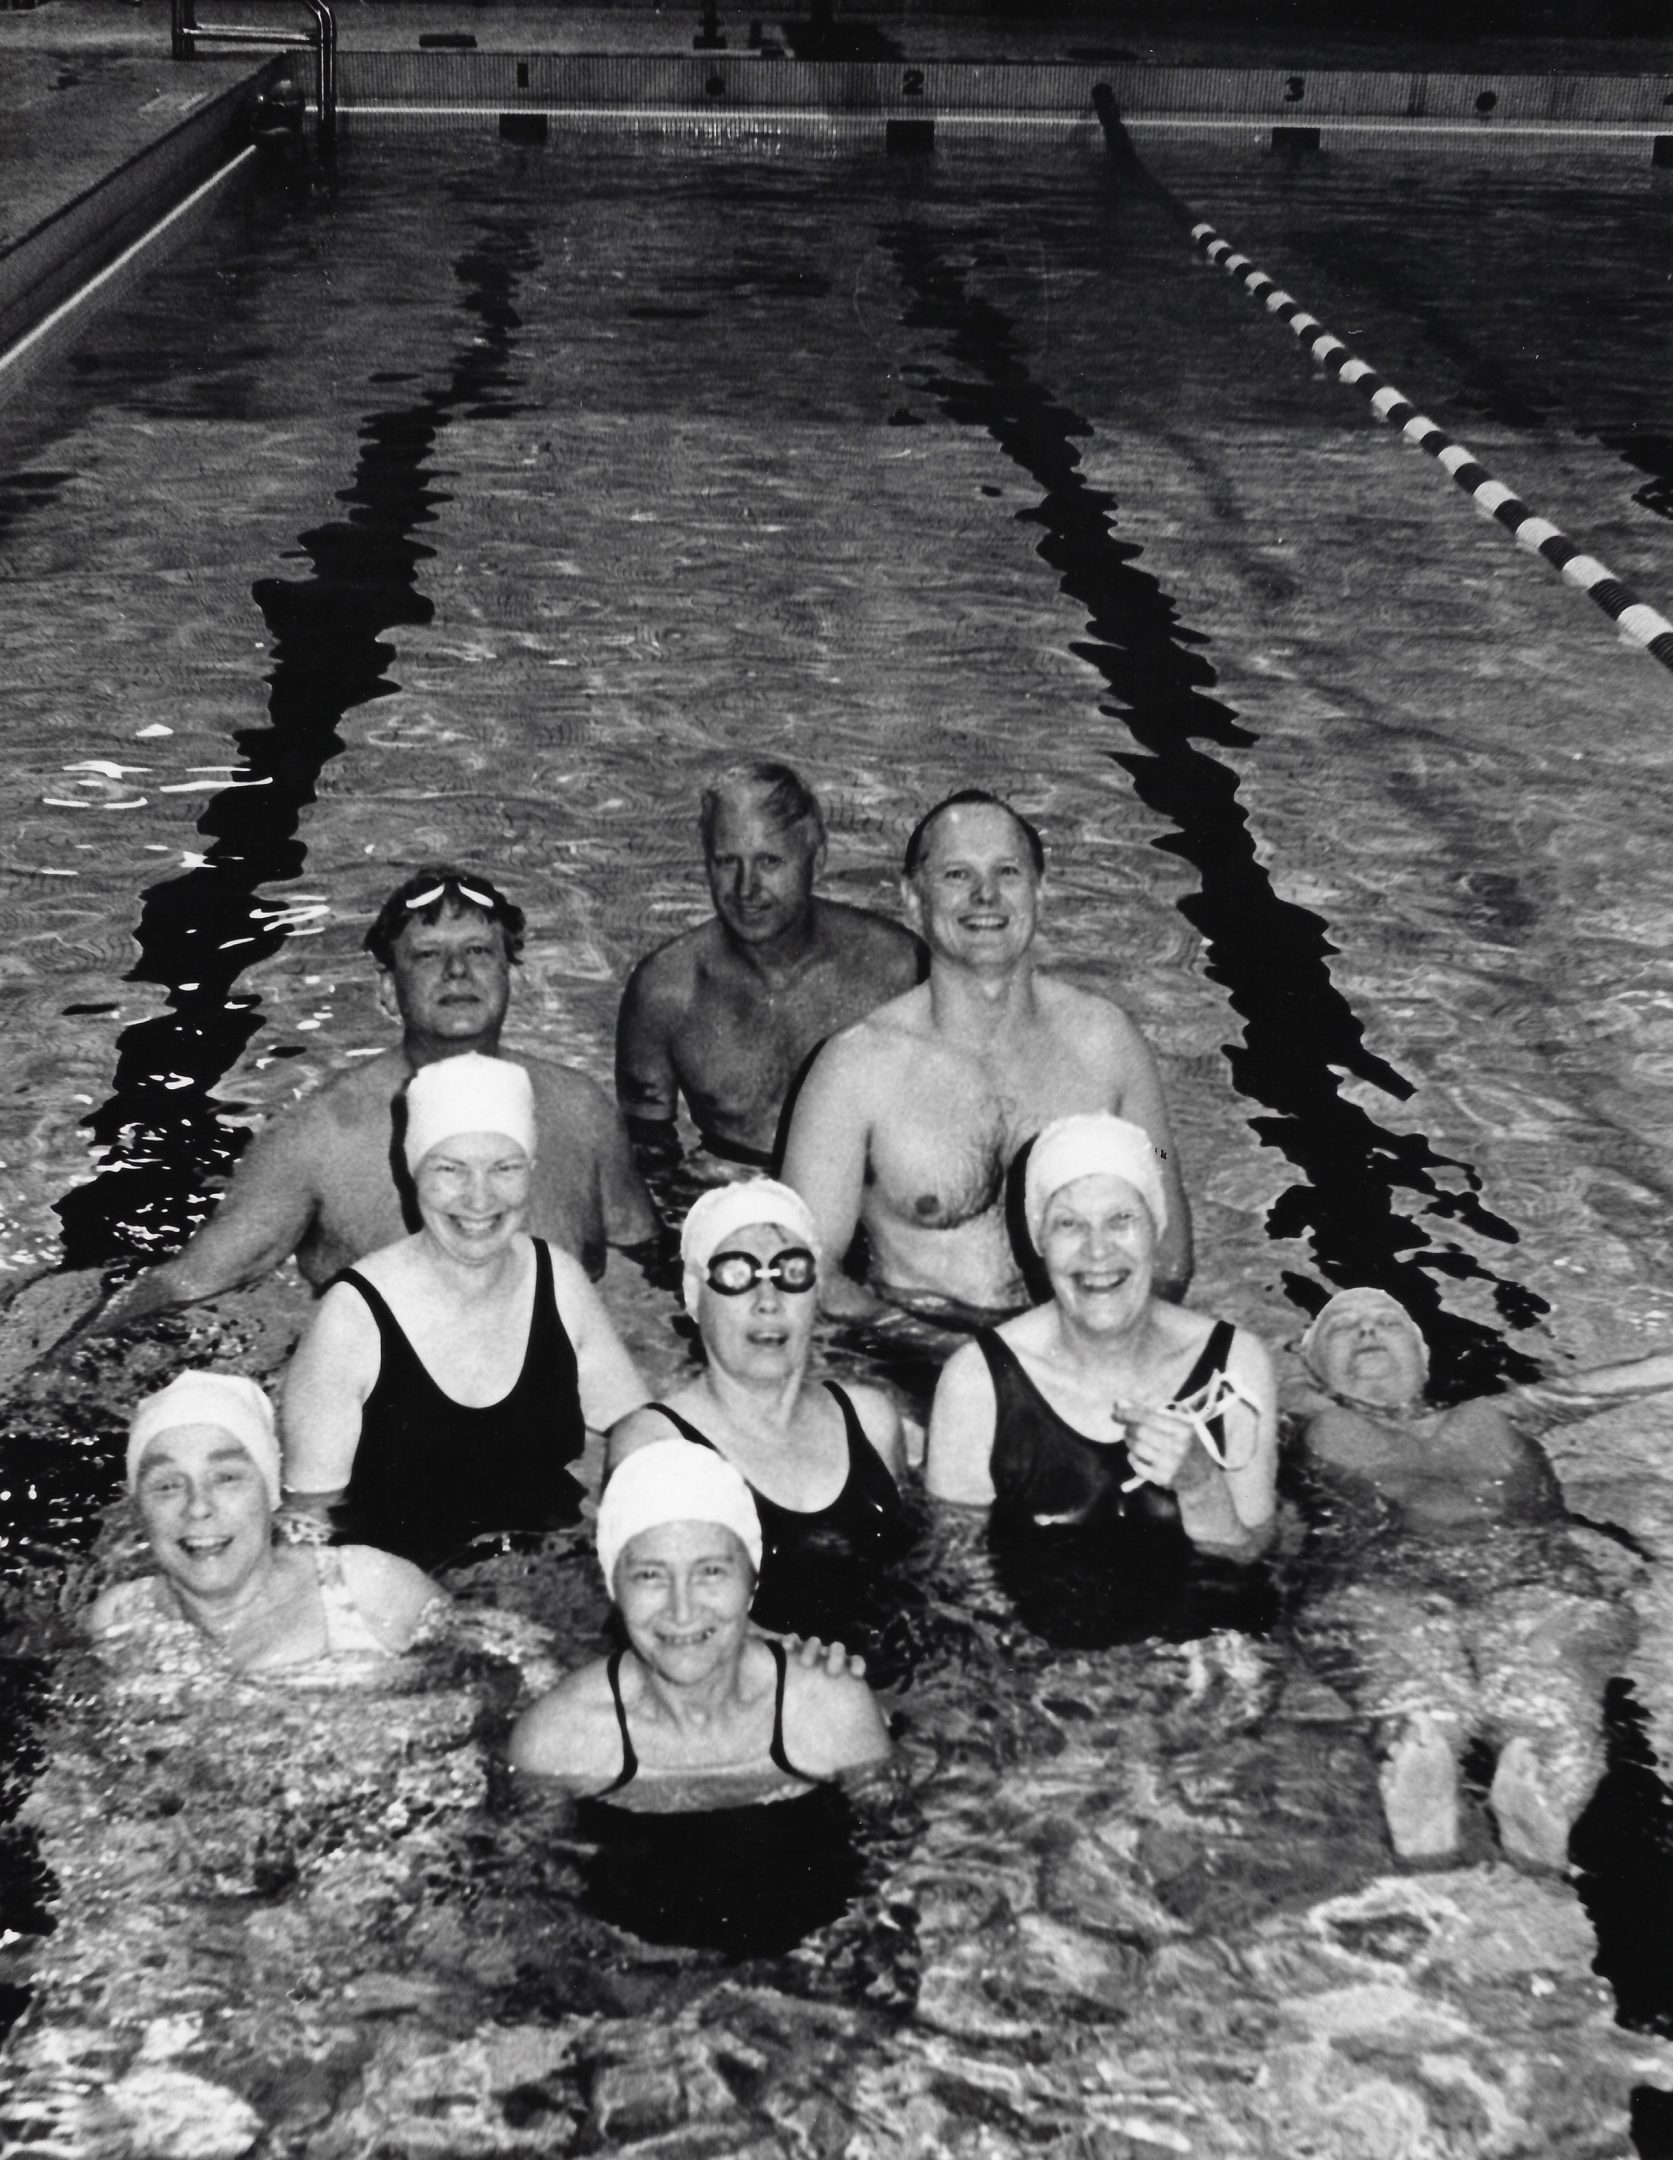 Photo of swimmers at Cornell Pool in 1986